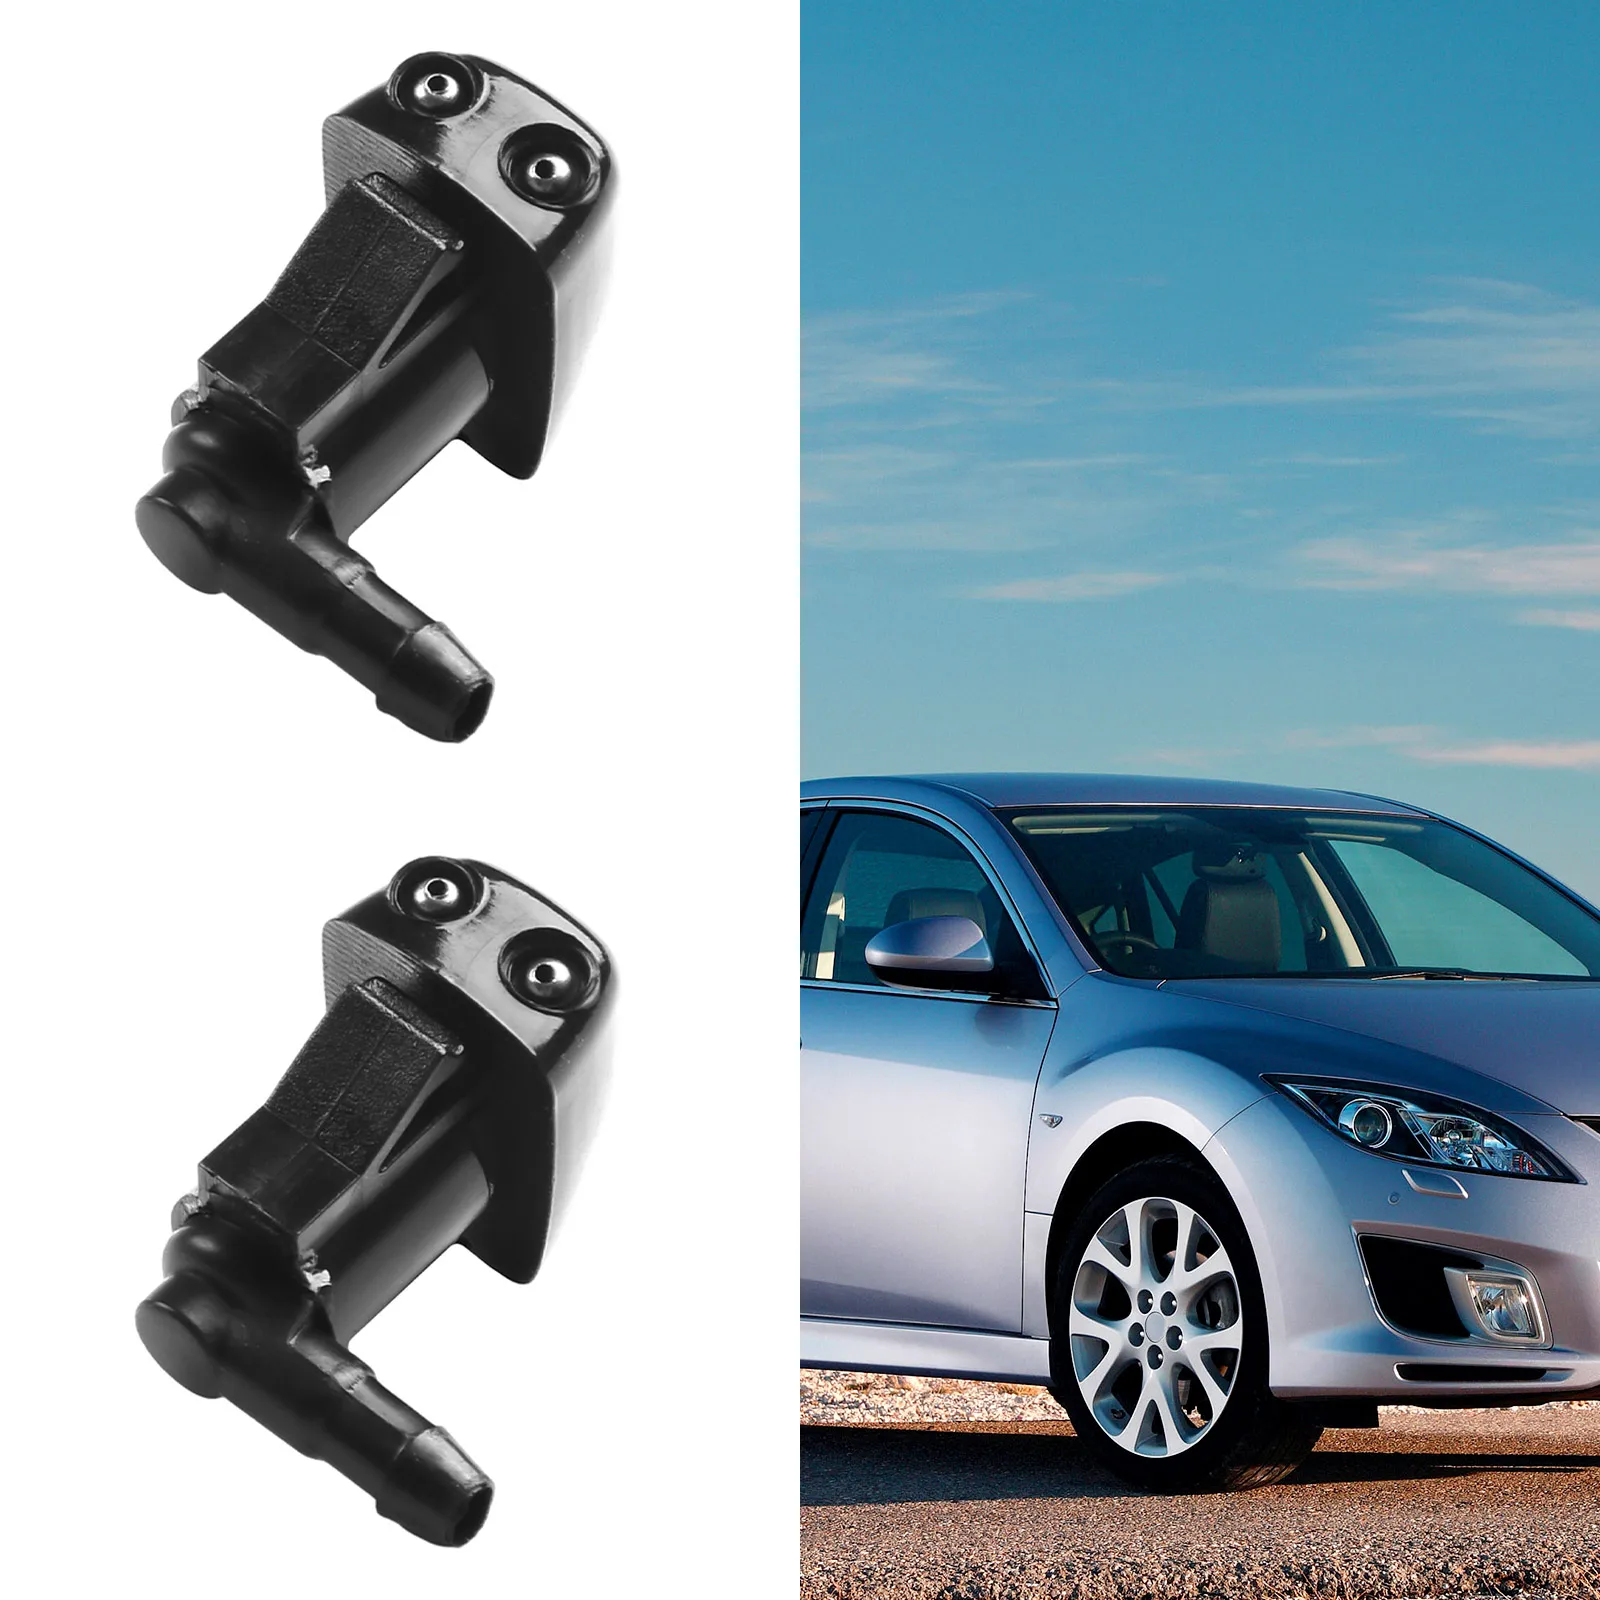 

Front Windscreen Wiper Washer Nozzles Jet Fit For Mazda 3/5/6 BK GG1 BN8V-67-510 ABS Plastic Auto Acesssories